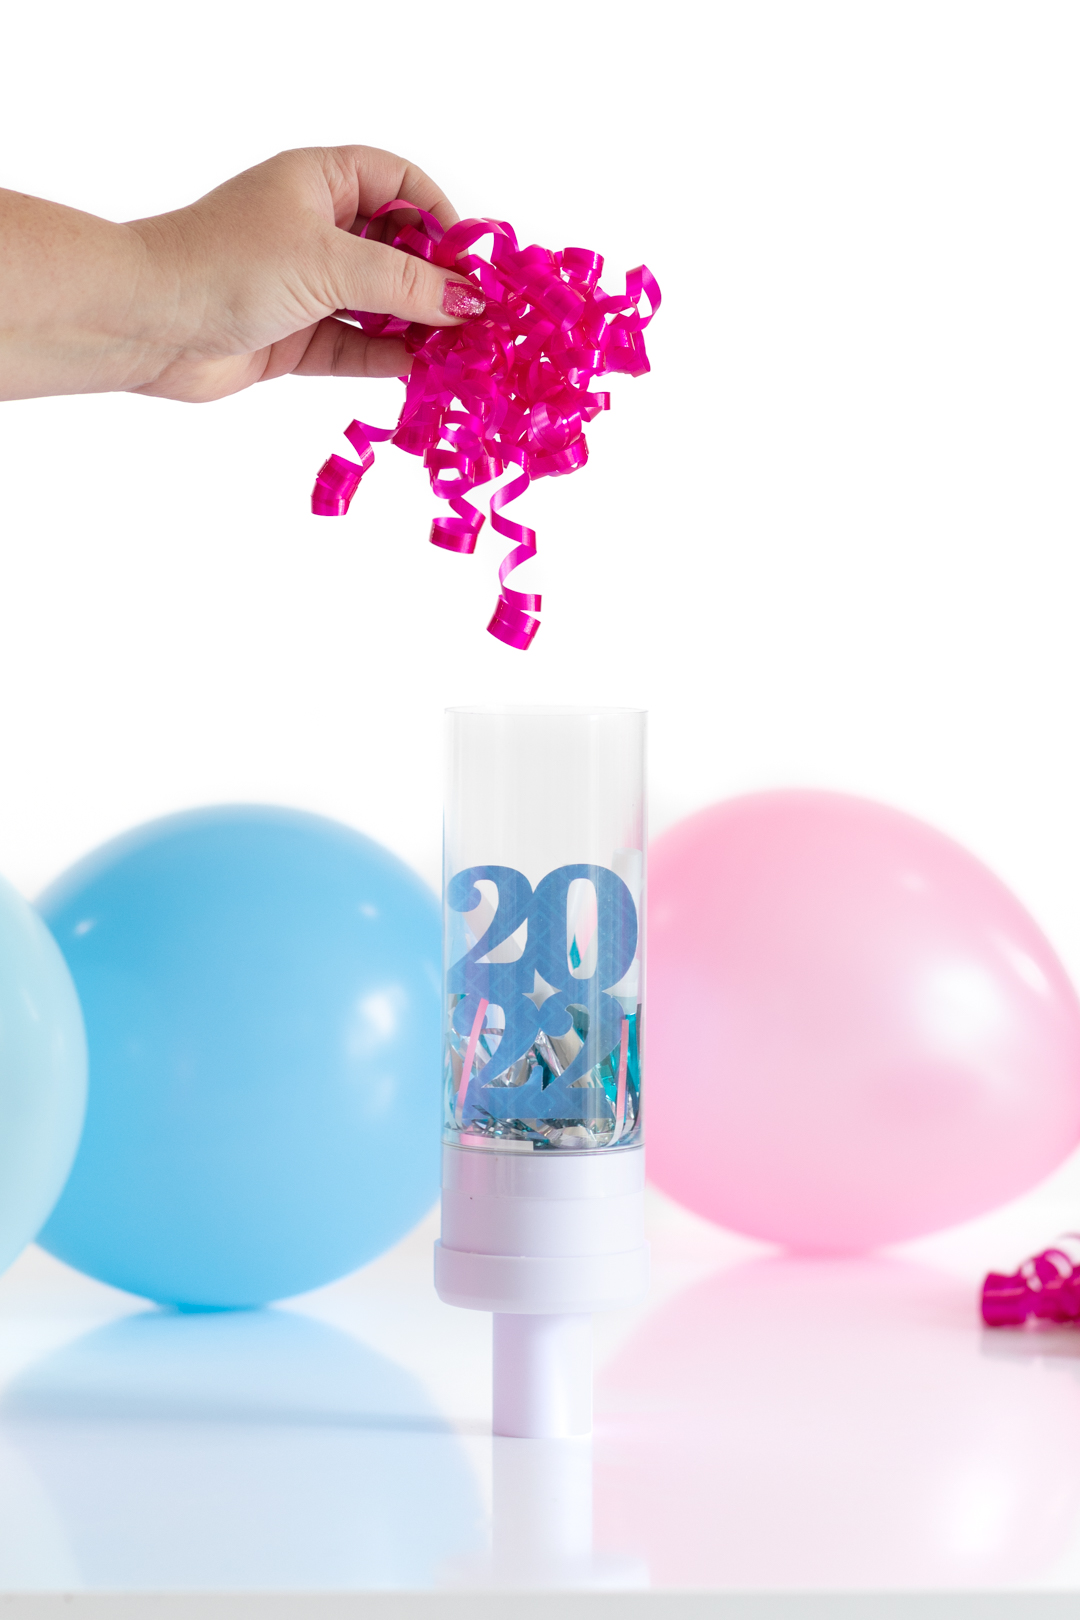 adding bright pink curly gift bow into a clear tube as a gift. 2022 decoration inside the tube, too.